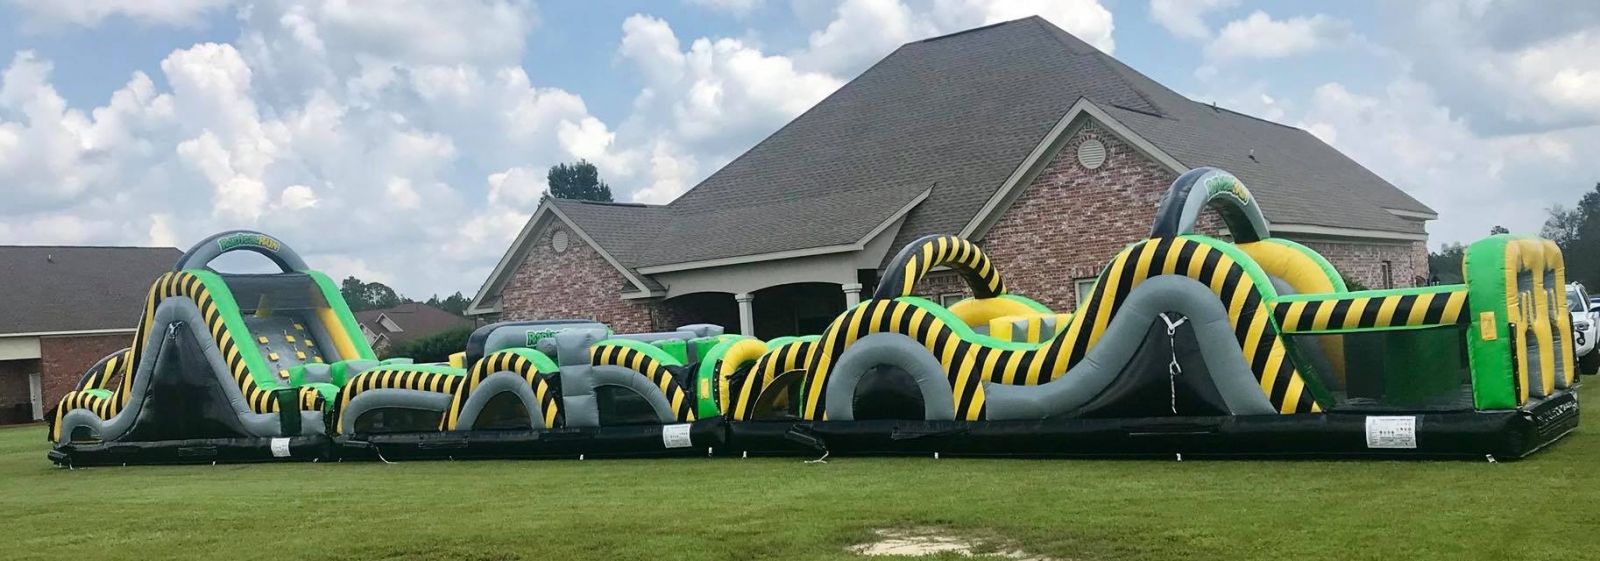 Largest inflatable obstacle course rental in mobile al